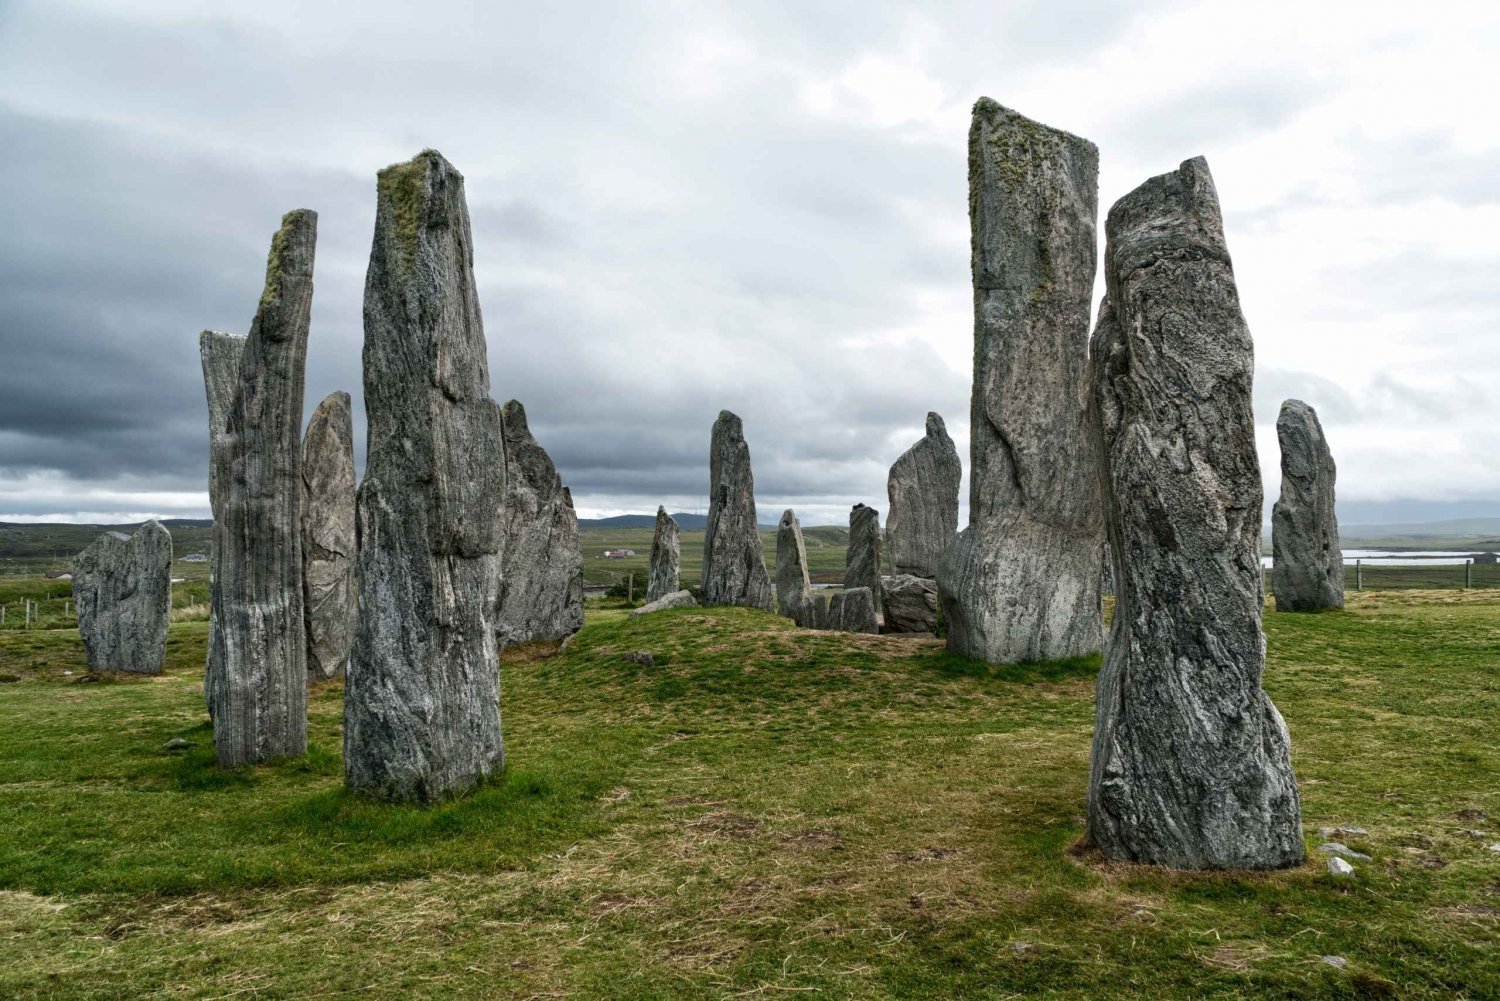 Isle of Skye and Outer Hebrides 6-Day Tour from Edinburgh